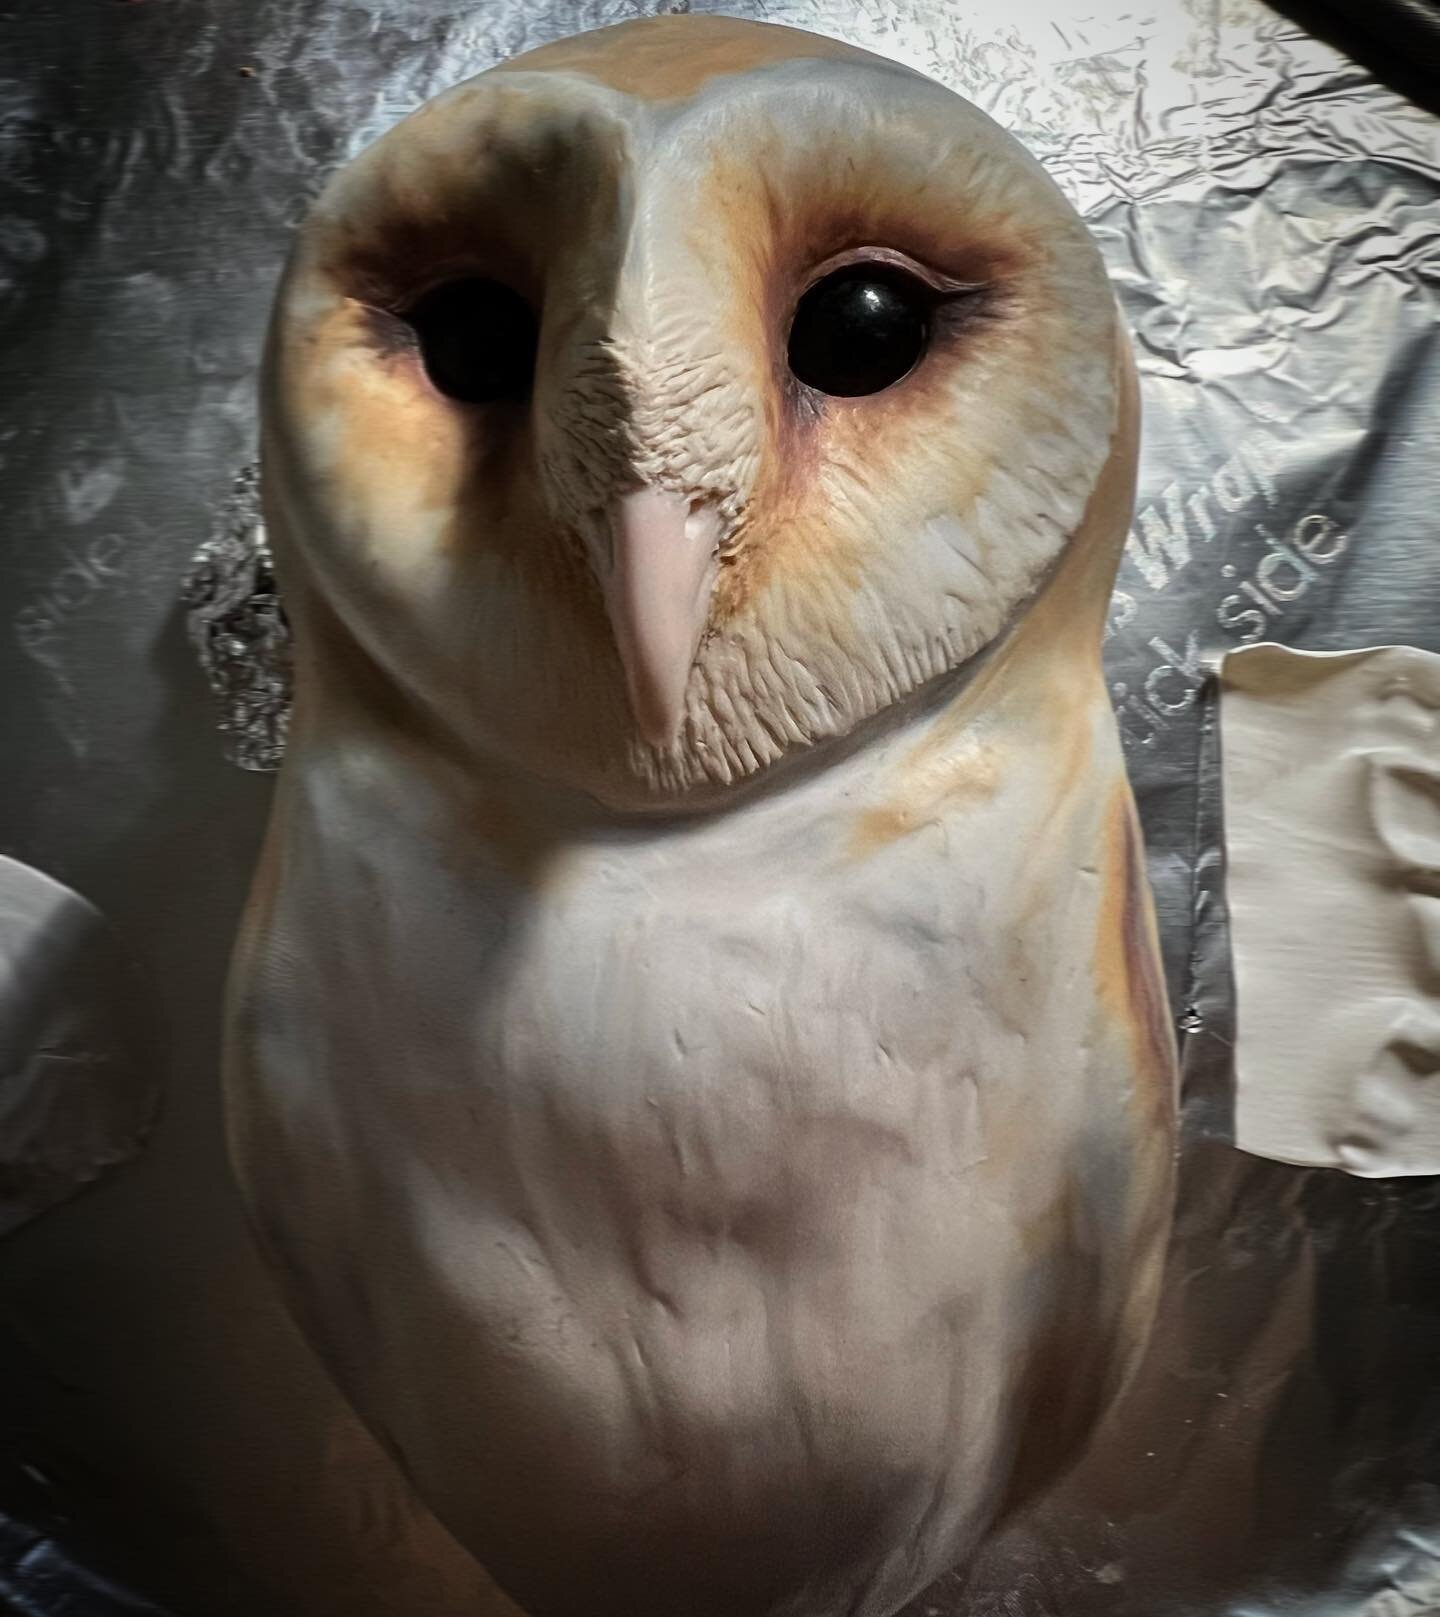 Making slow progress on my owl for &lsquo;Modern Mythos&rsquo; opening at @valkariegallery next month. I&rsquo;m working on at least eight other pieces for the show at the moment and can&rsquo;t wait to share what all I&rsquo;ve been up to! The show 